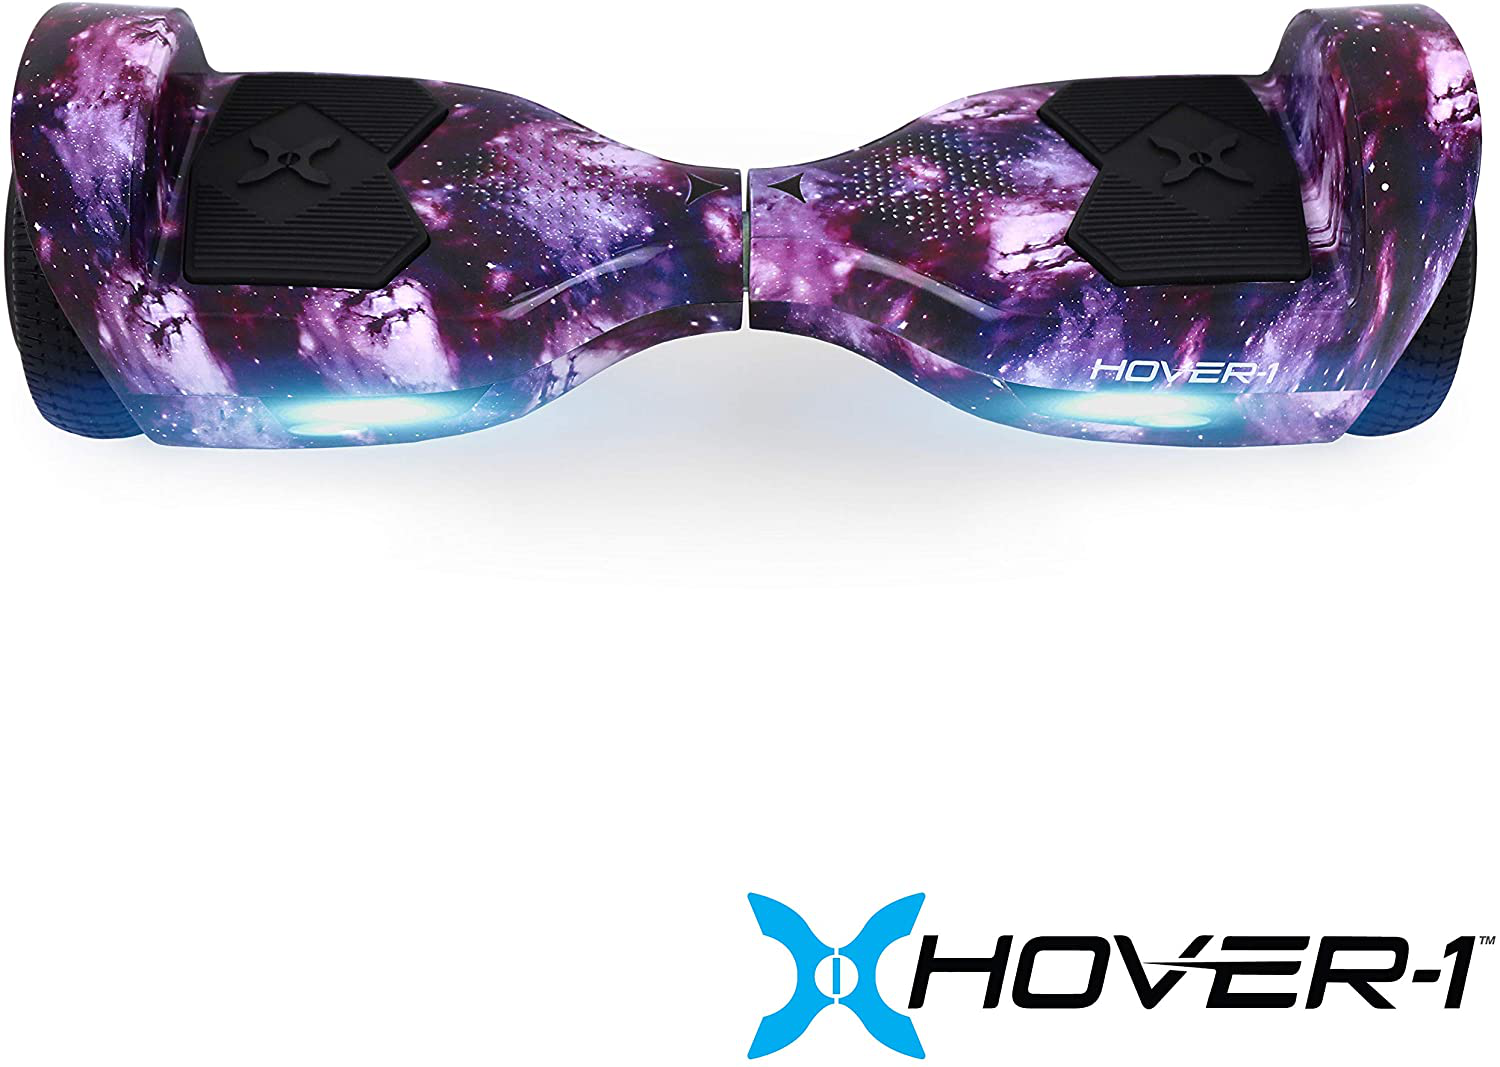 Hover-1 Helix Electric Hoverboard | 7MPH Top Speed, 4 Mile Range, 6HR Full-Charge, Built-In Bluetooth Speaker, Rider Modes: Beginner to Expert, Iridescent